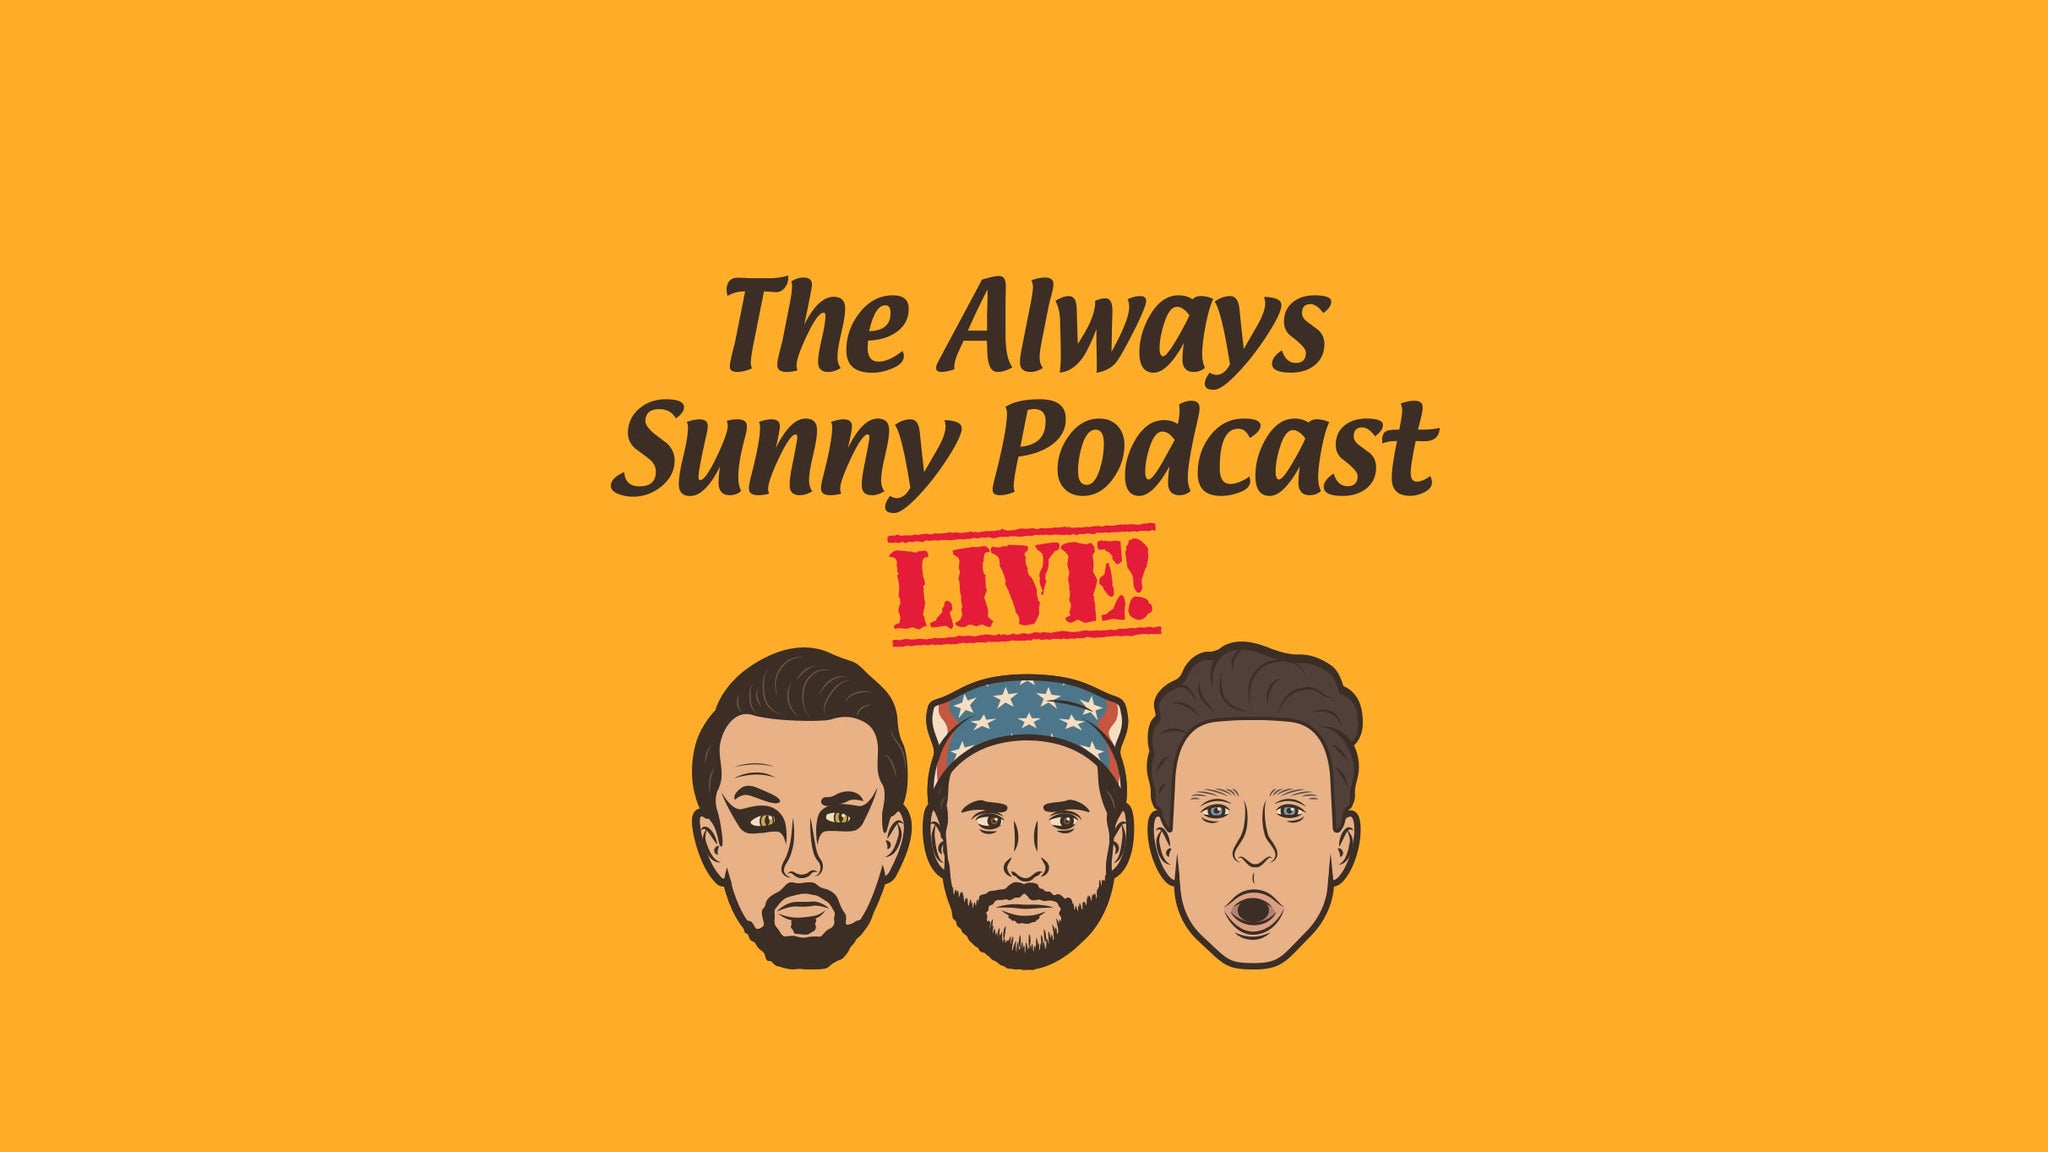 The Always Sunny Podcast pre-sale password